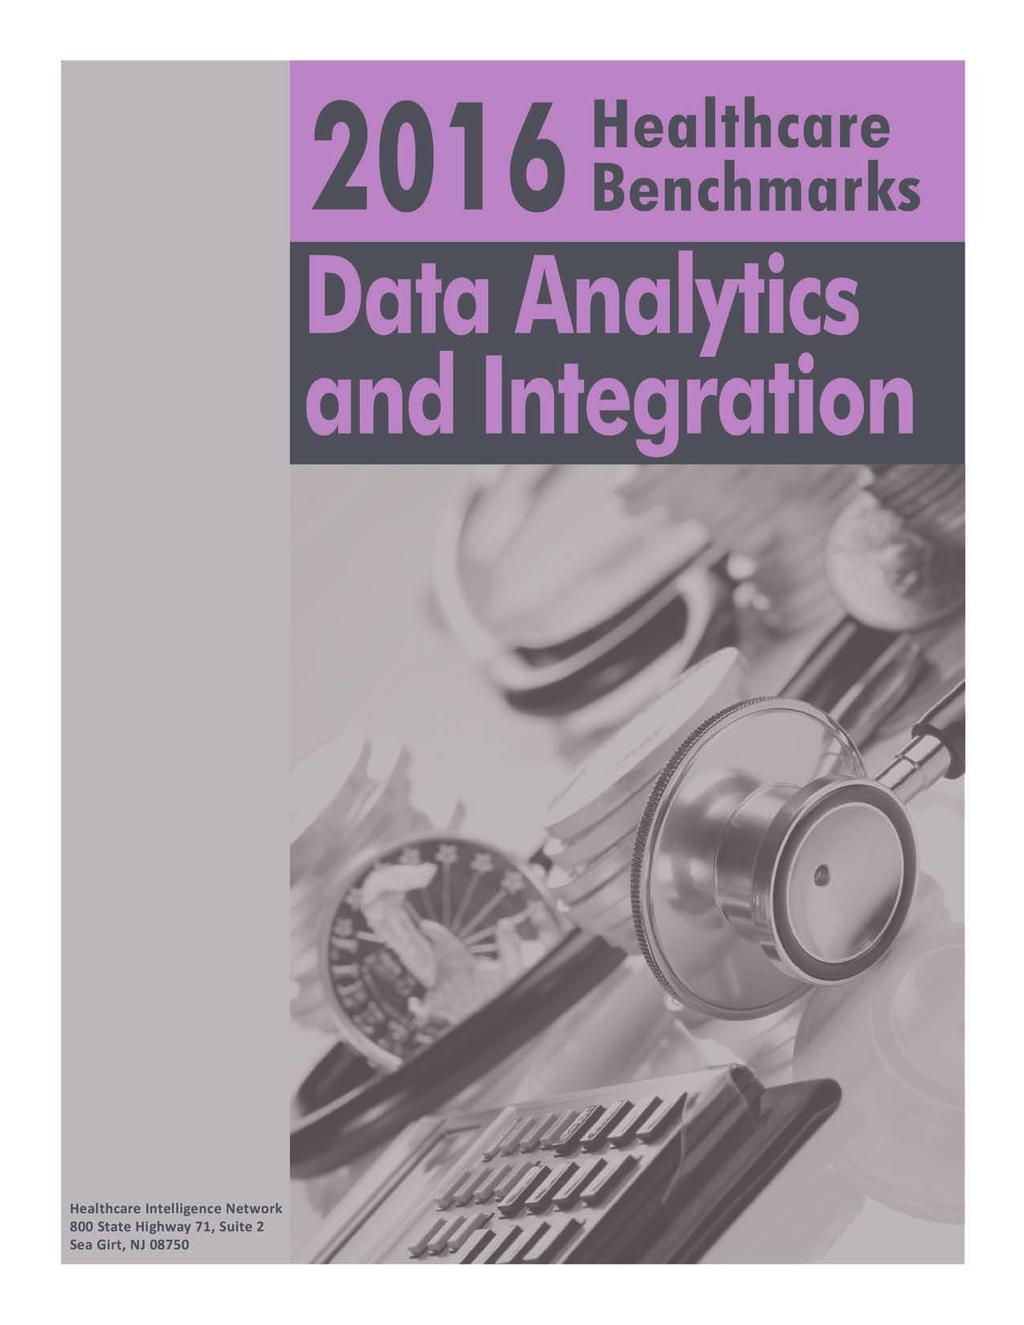 Note: This is an authorized excerpt from 2016 Healthcare Benchmarks: Data Analytics and Integration.